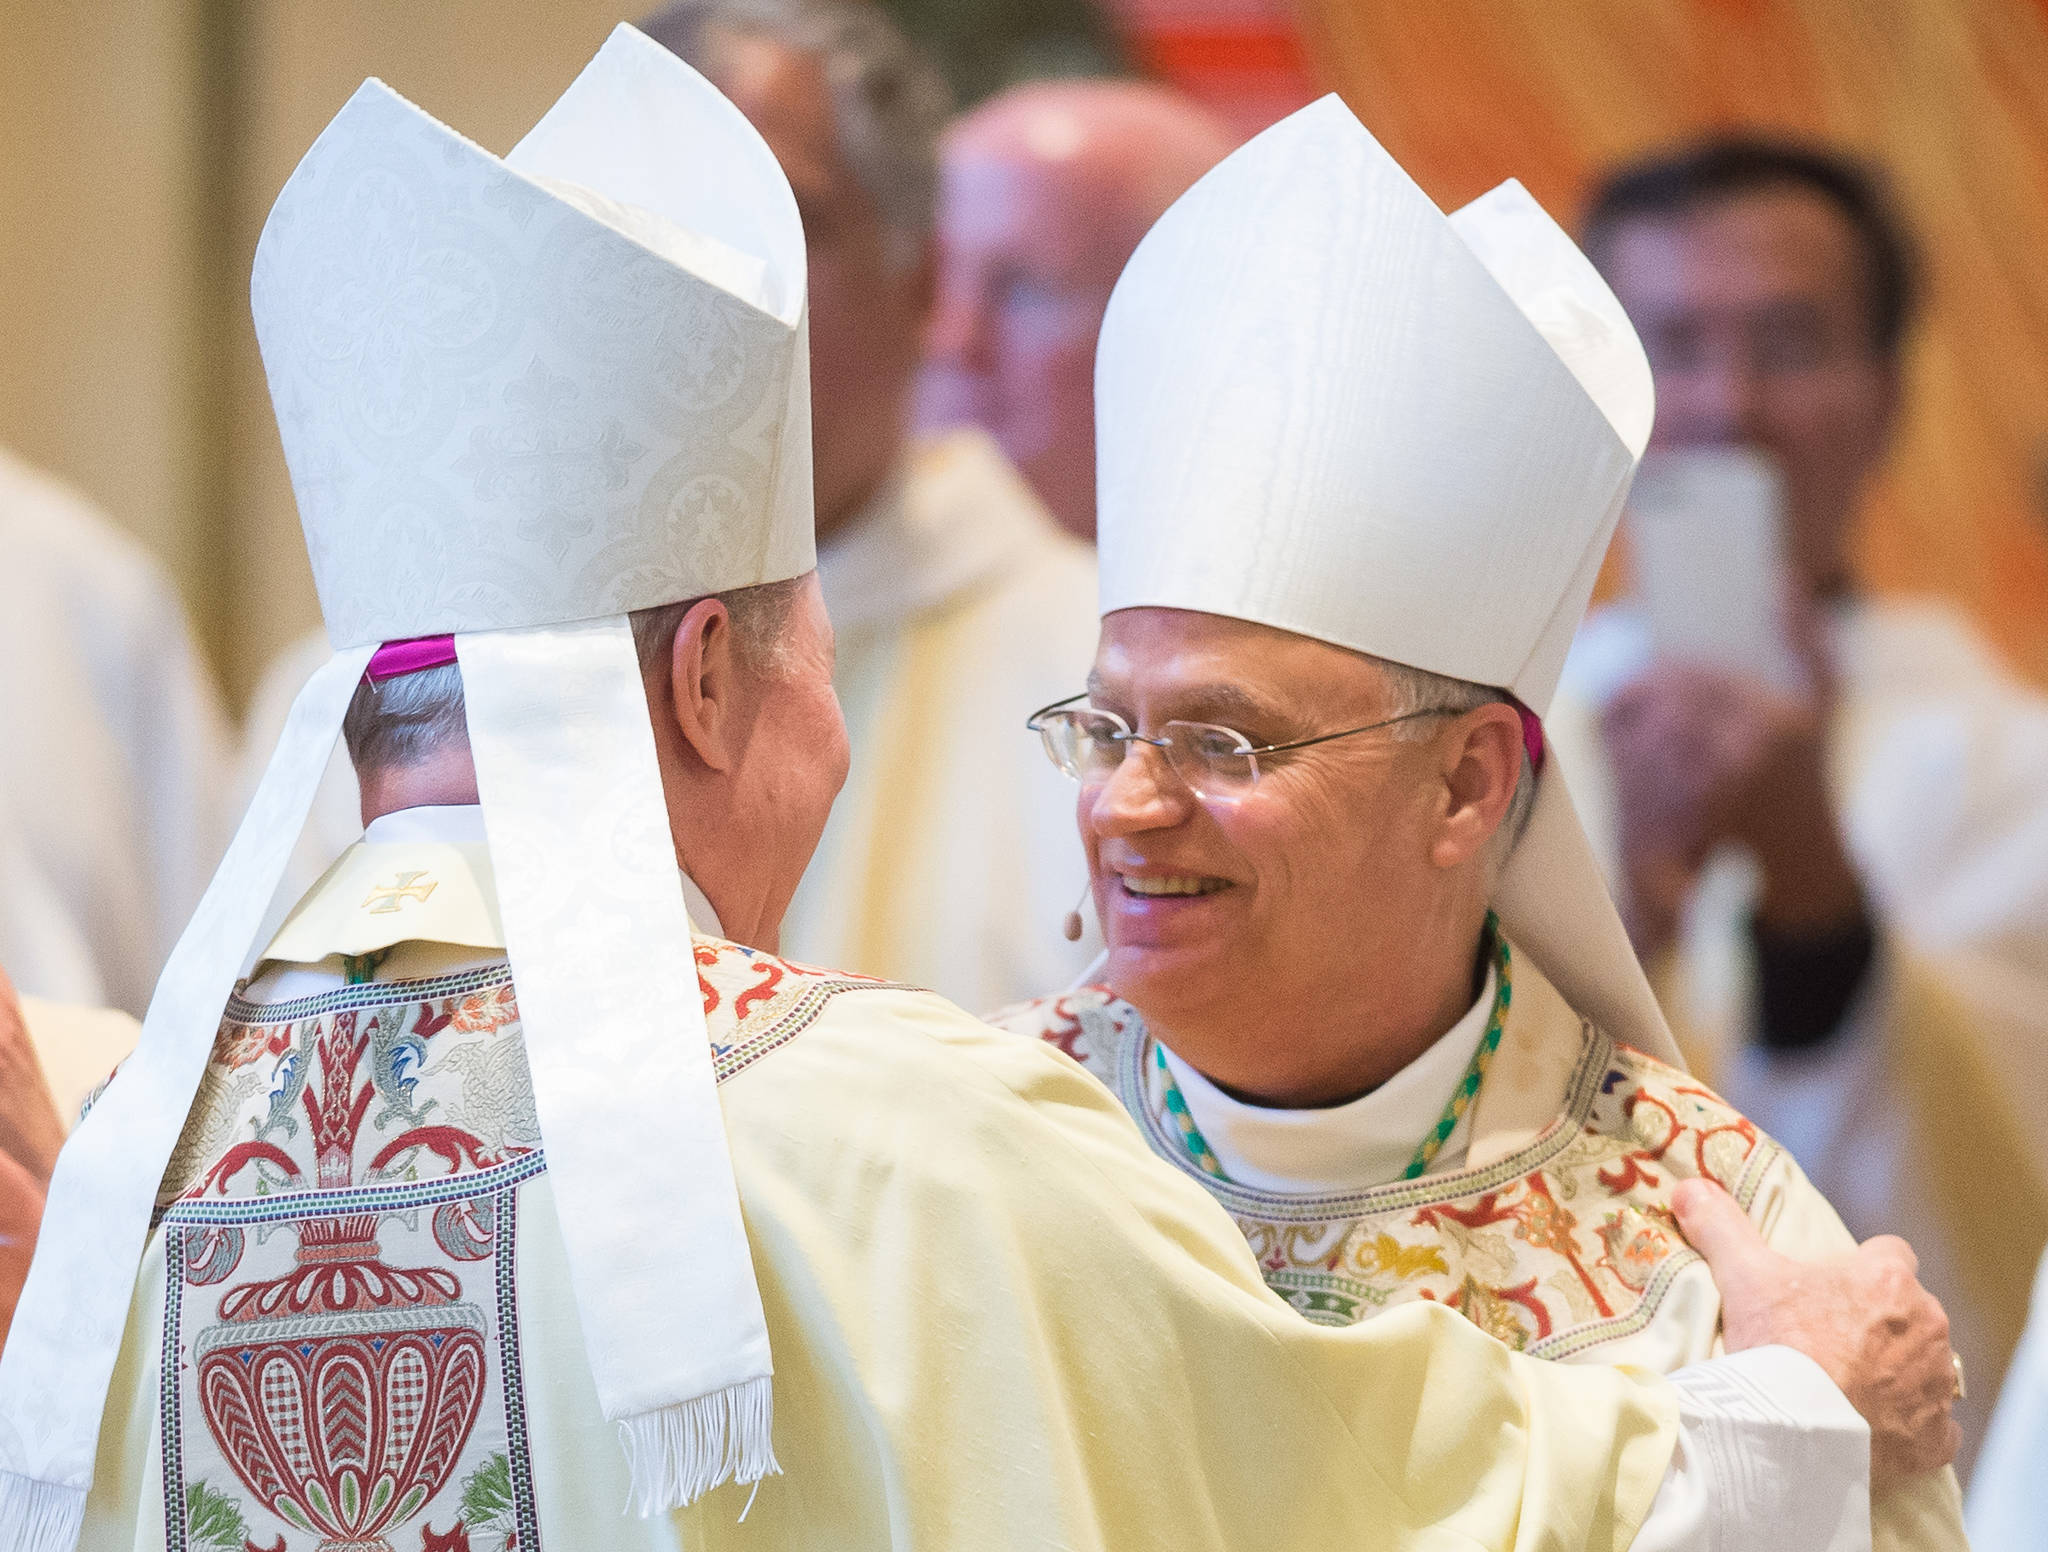 Bishop Andrew E. Bellisario, right, is greeted by Bishop Edward J. Burns during his ordination as the Sixth Bishop of the Diocese of Juneau at St. Paul the Apostle Catholic Church on Tuesday, Oct. 10, 2017. Burns was the Diocese’s Fifth Bishop and is now the Bishop of Dallas. (Michael Penn | Juneau Empire)